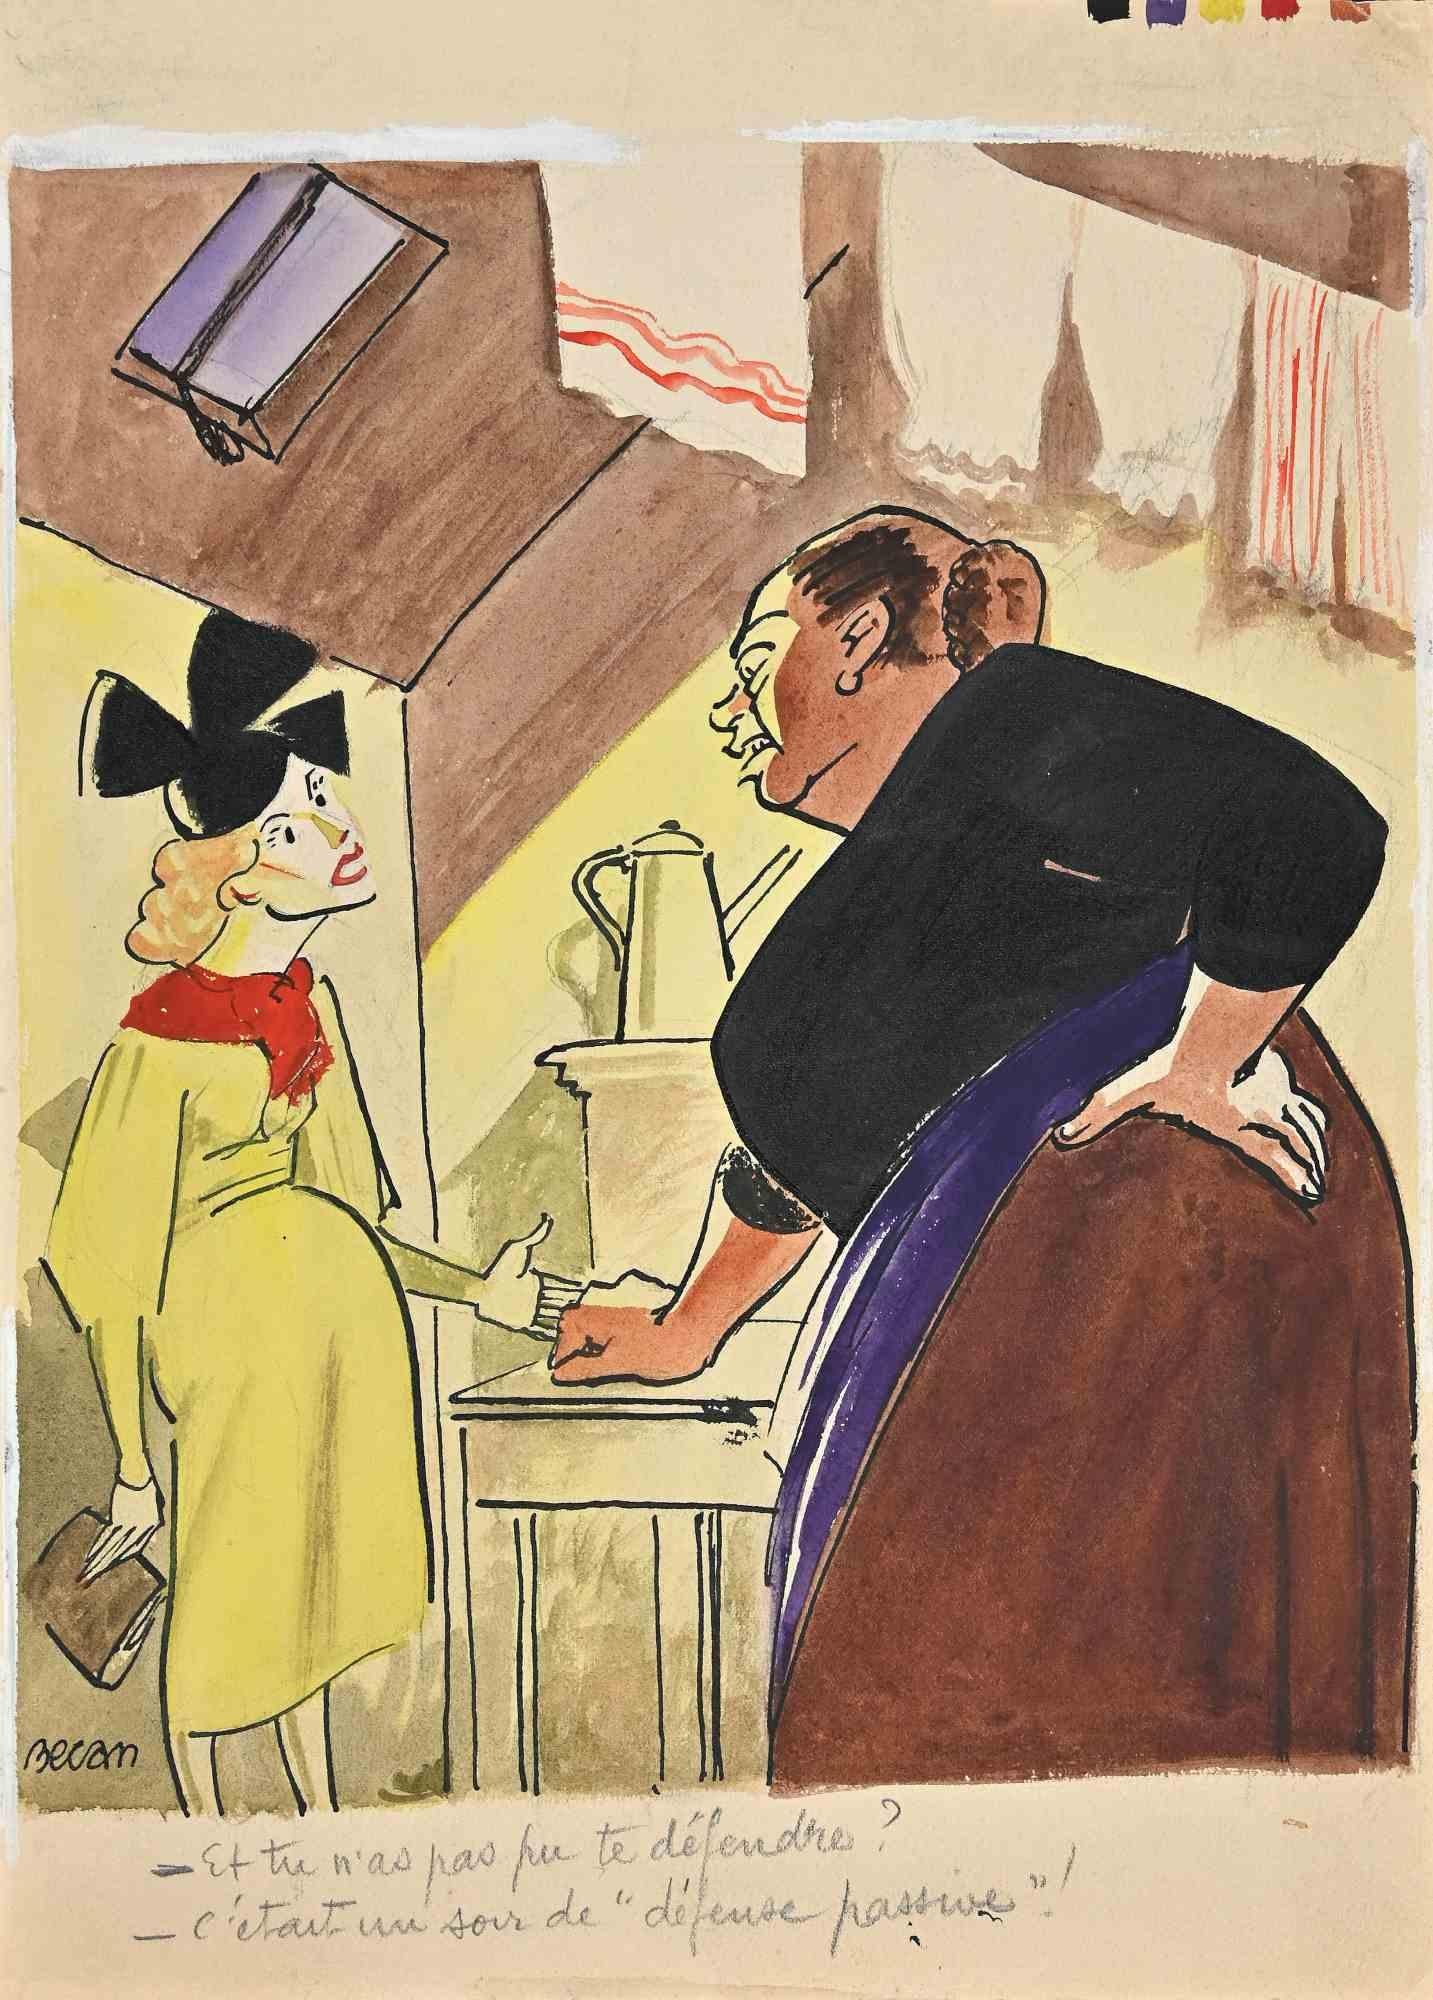 The Conversation of two women is a drawing in mixed media( pencil-watercolor-tempera) realized in the 1920s Century by Bernard Bécan (1890-1943).

Hand-signed on the lower left.

In good conditions.

The artwork is depicted through deft and precise